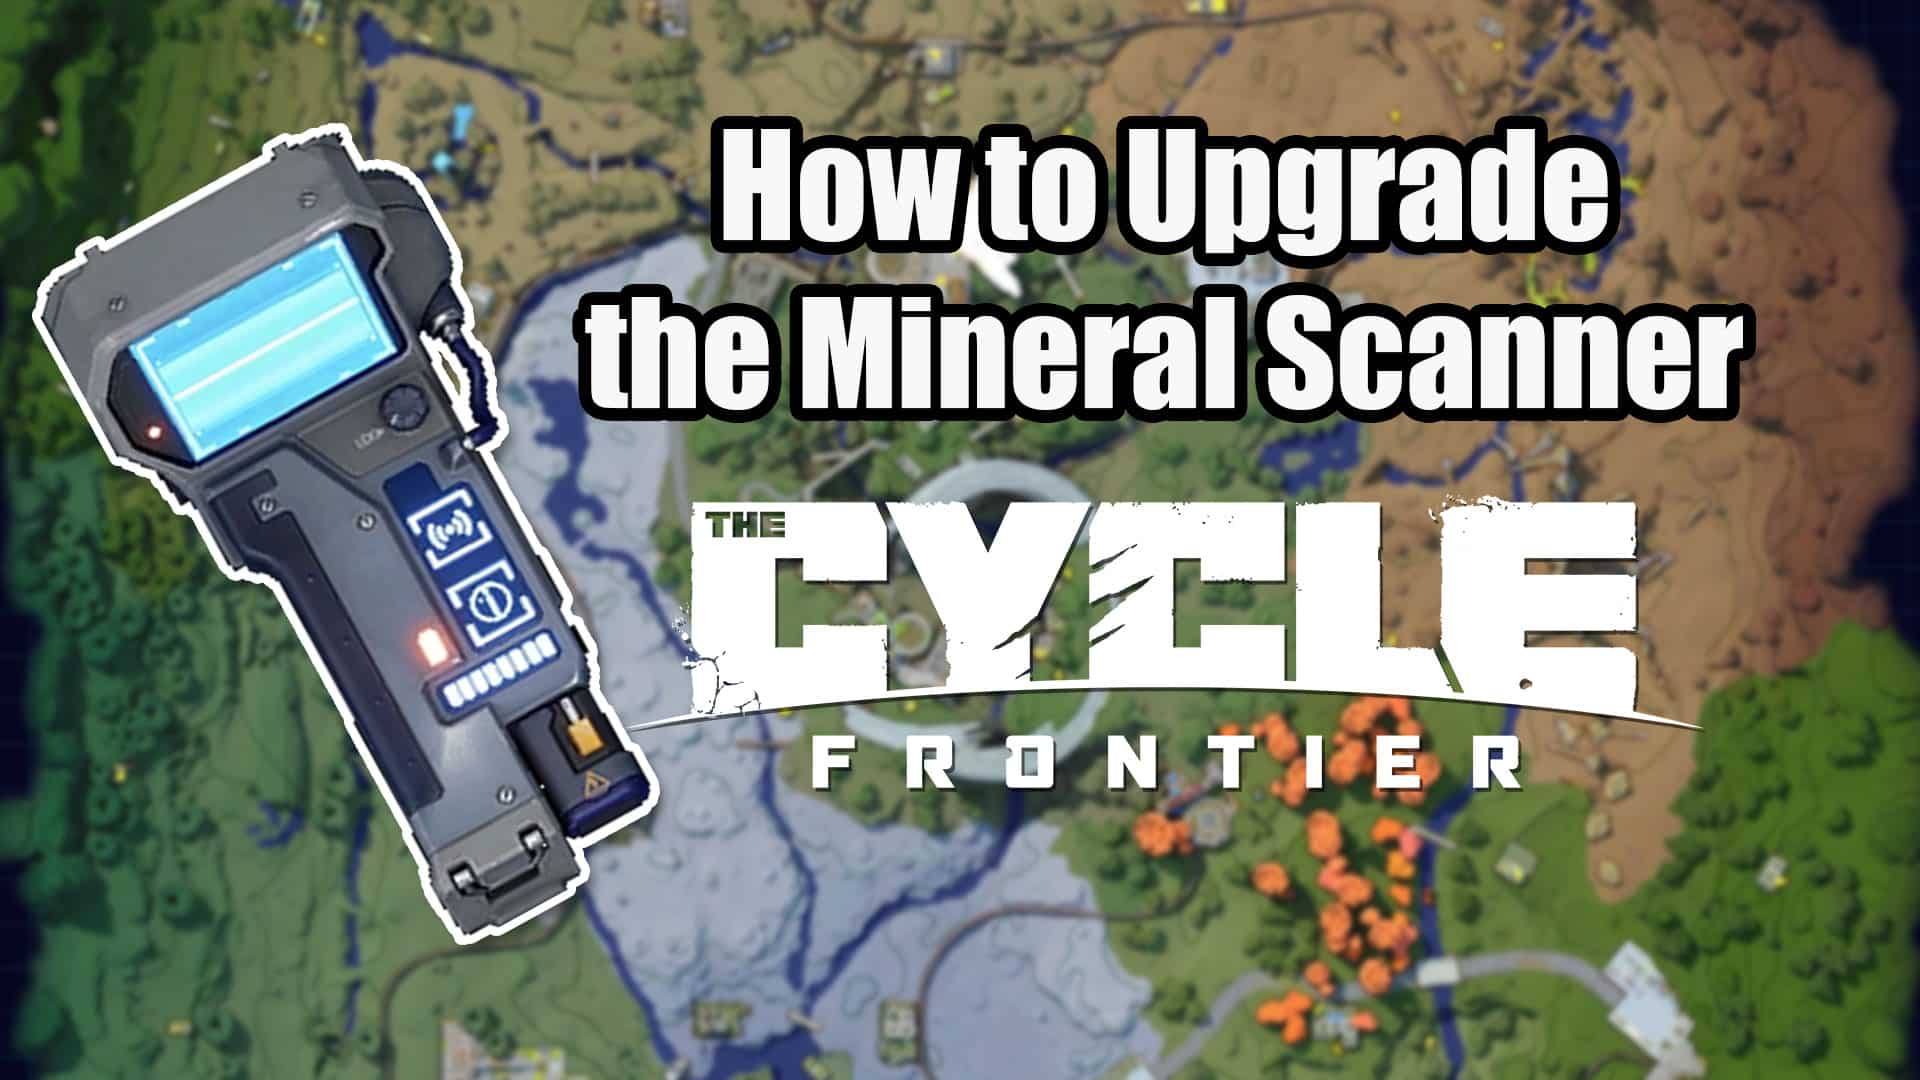 how to upgrade the mineral scanner in the cycle frontier